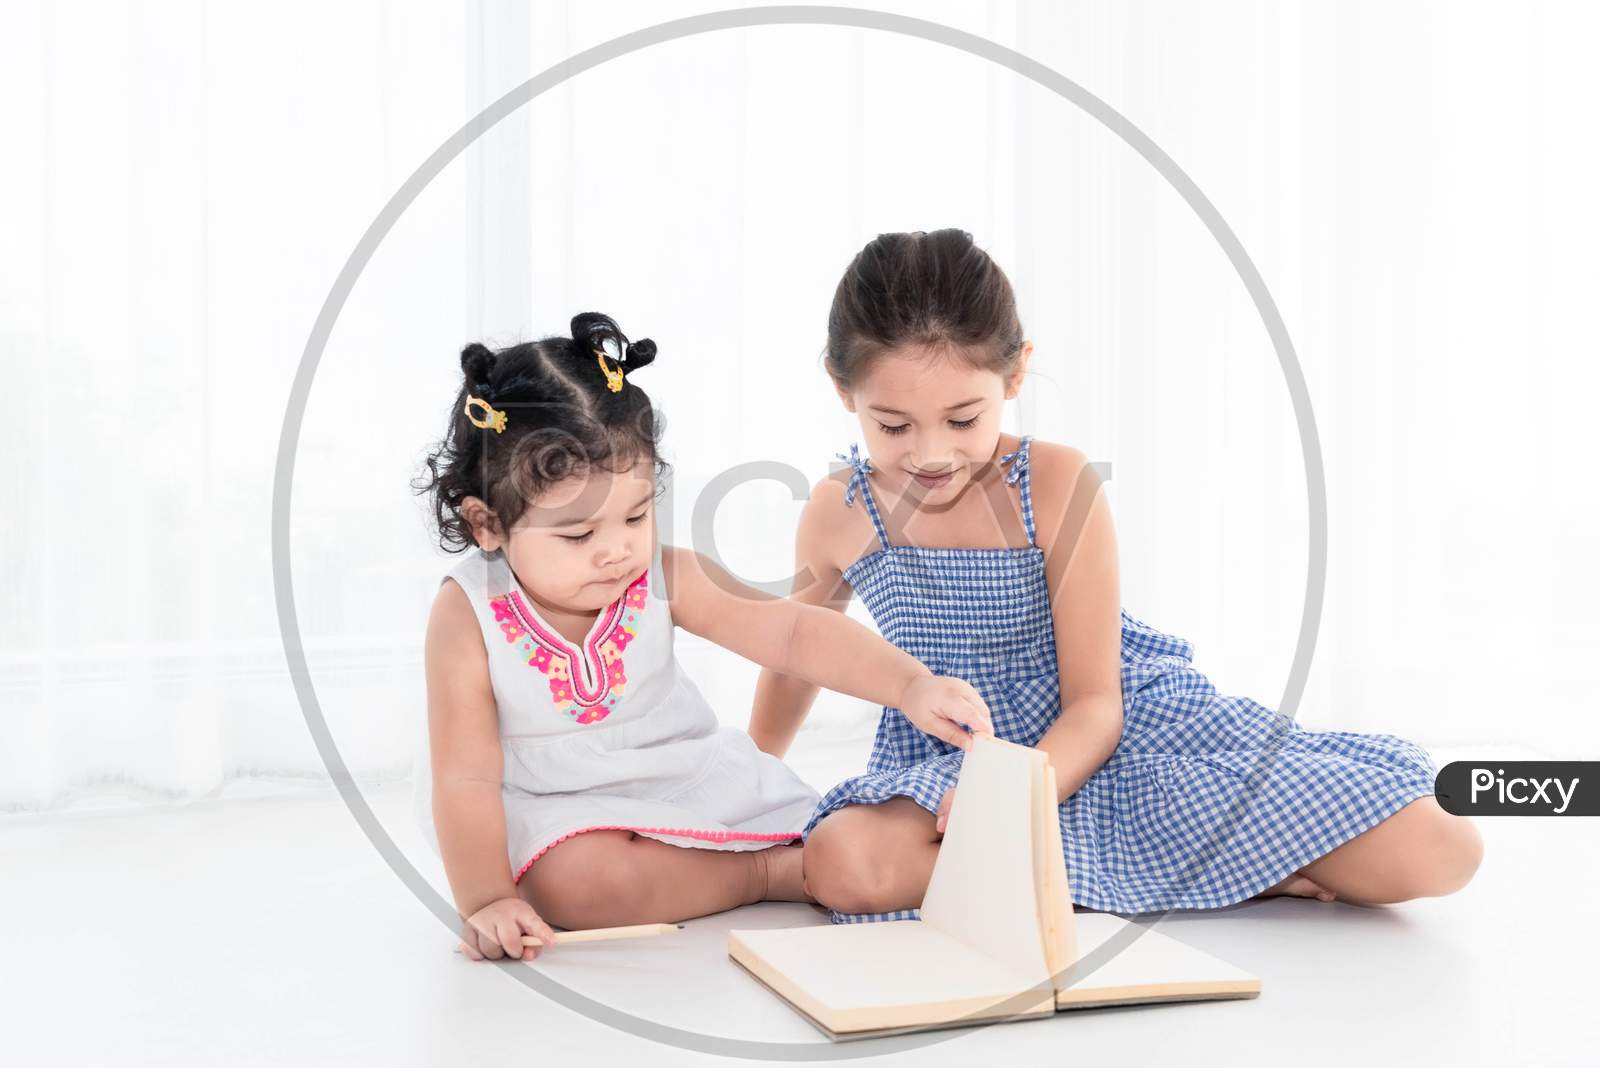 Happy Two Sister Drawing In Sketch Book Together At Home Or Nursery. People Lifestyle And Kids Play. Education And Children Concept. Diverse Ethnicity And Ages. Back To School Theme